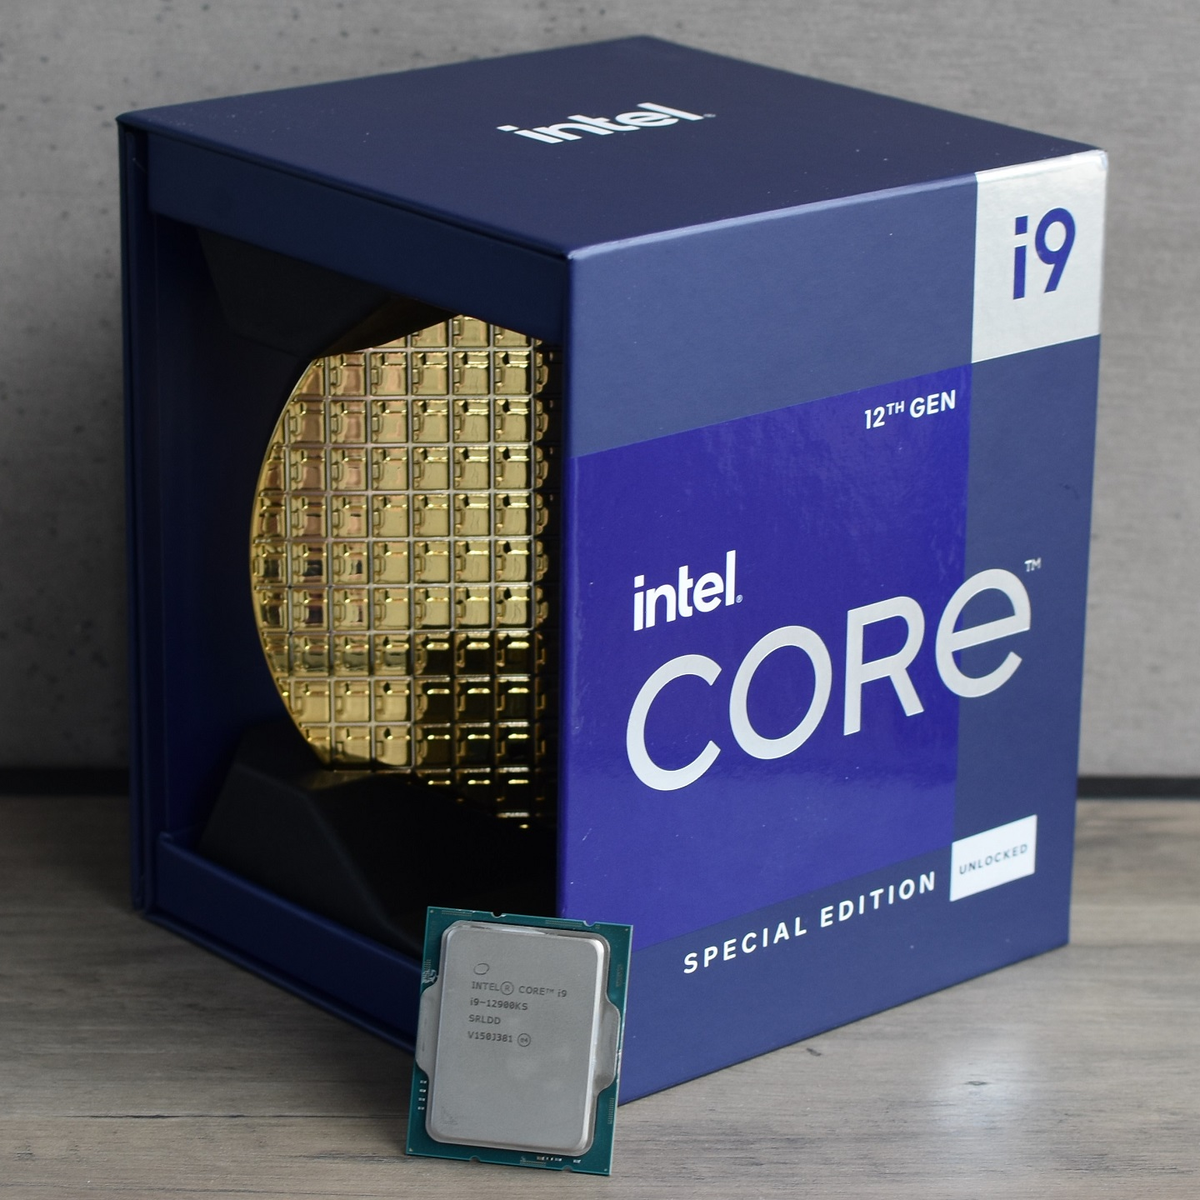 Intel Core i9-12900KS review: Intel's fastest gaming CPU yet